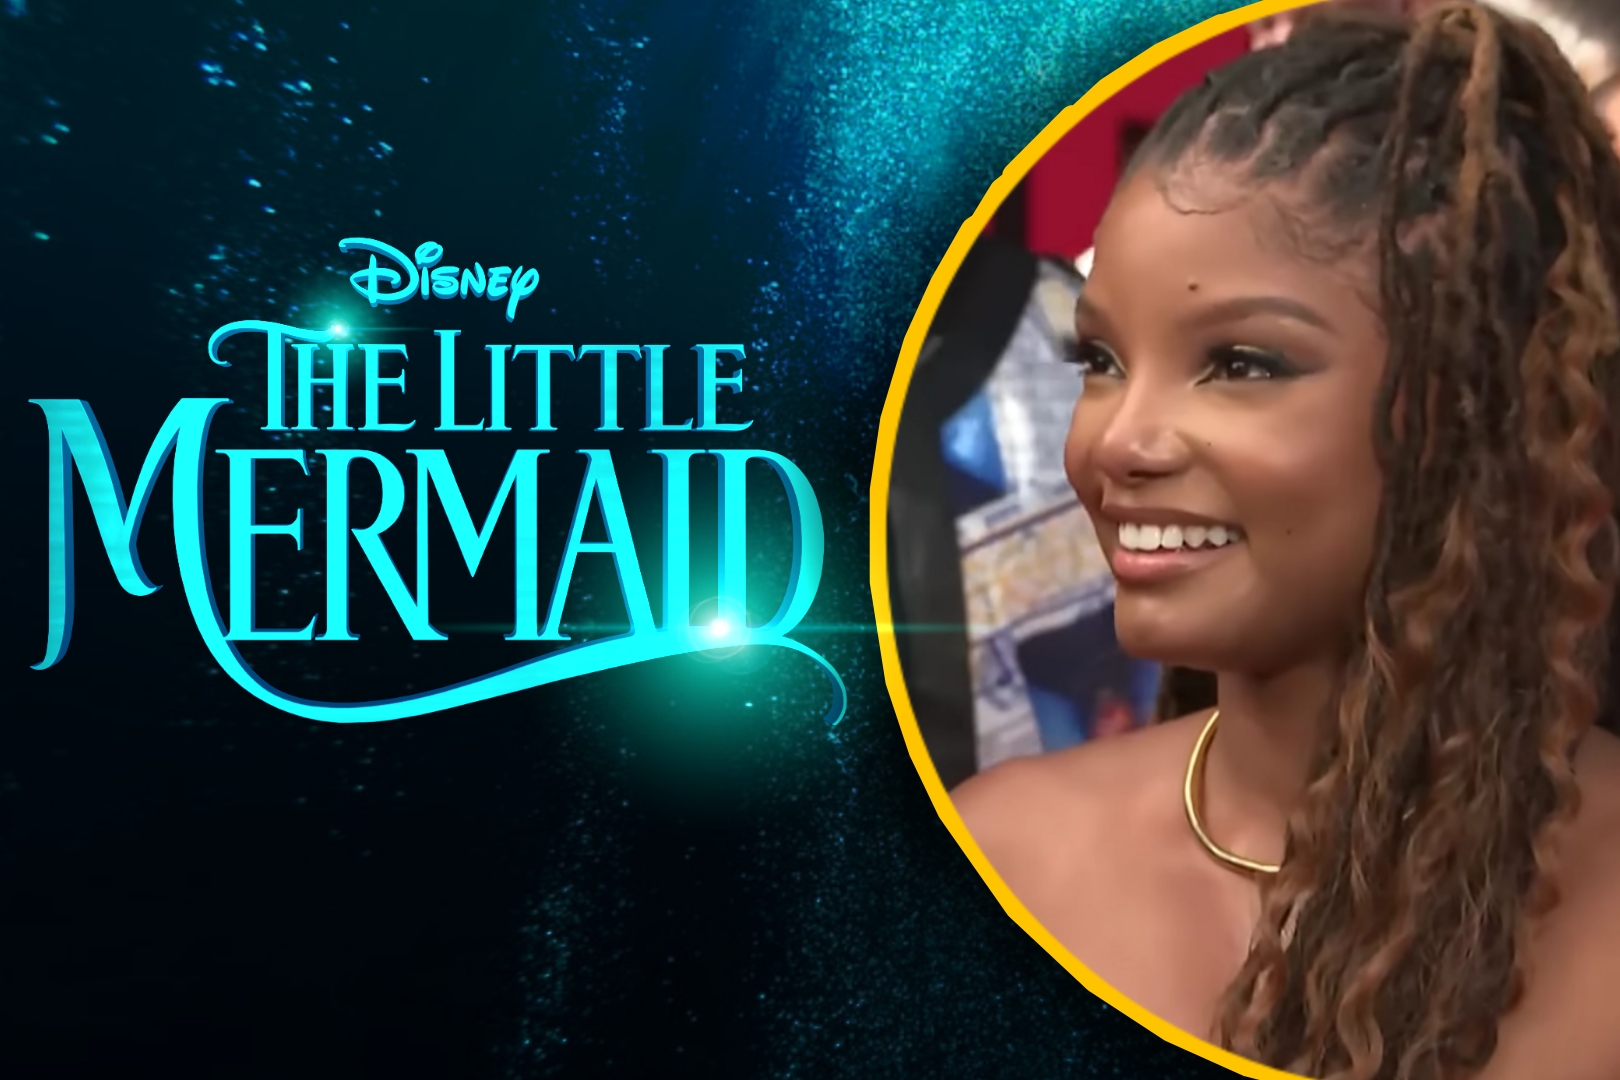 Halle Bailey Got Emotional While Recording Adr For The Little Mermaid Daily Disney News